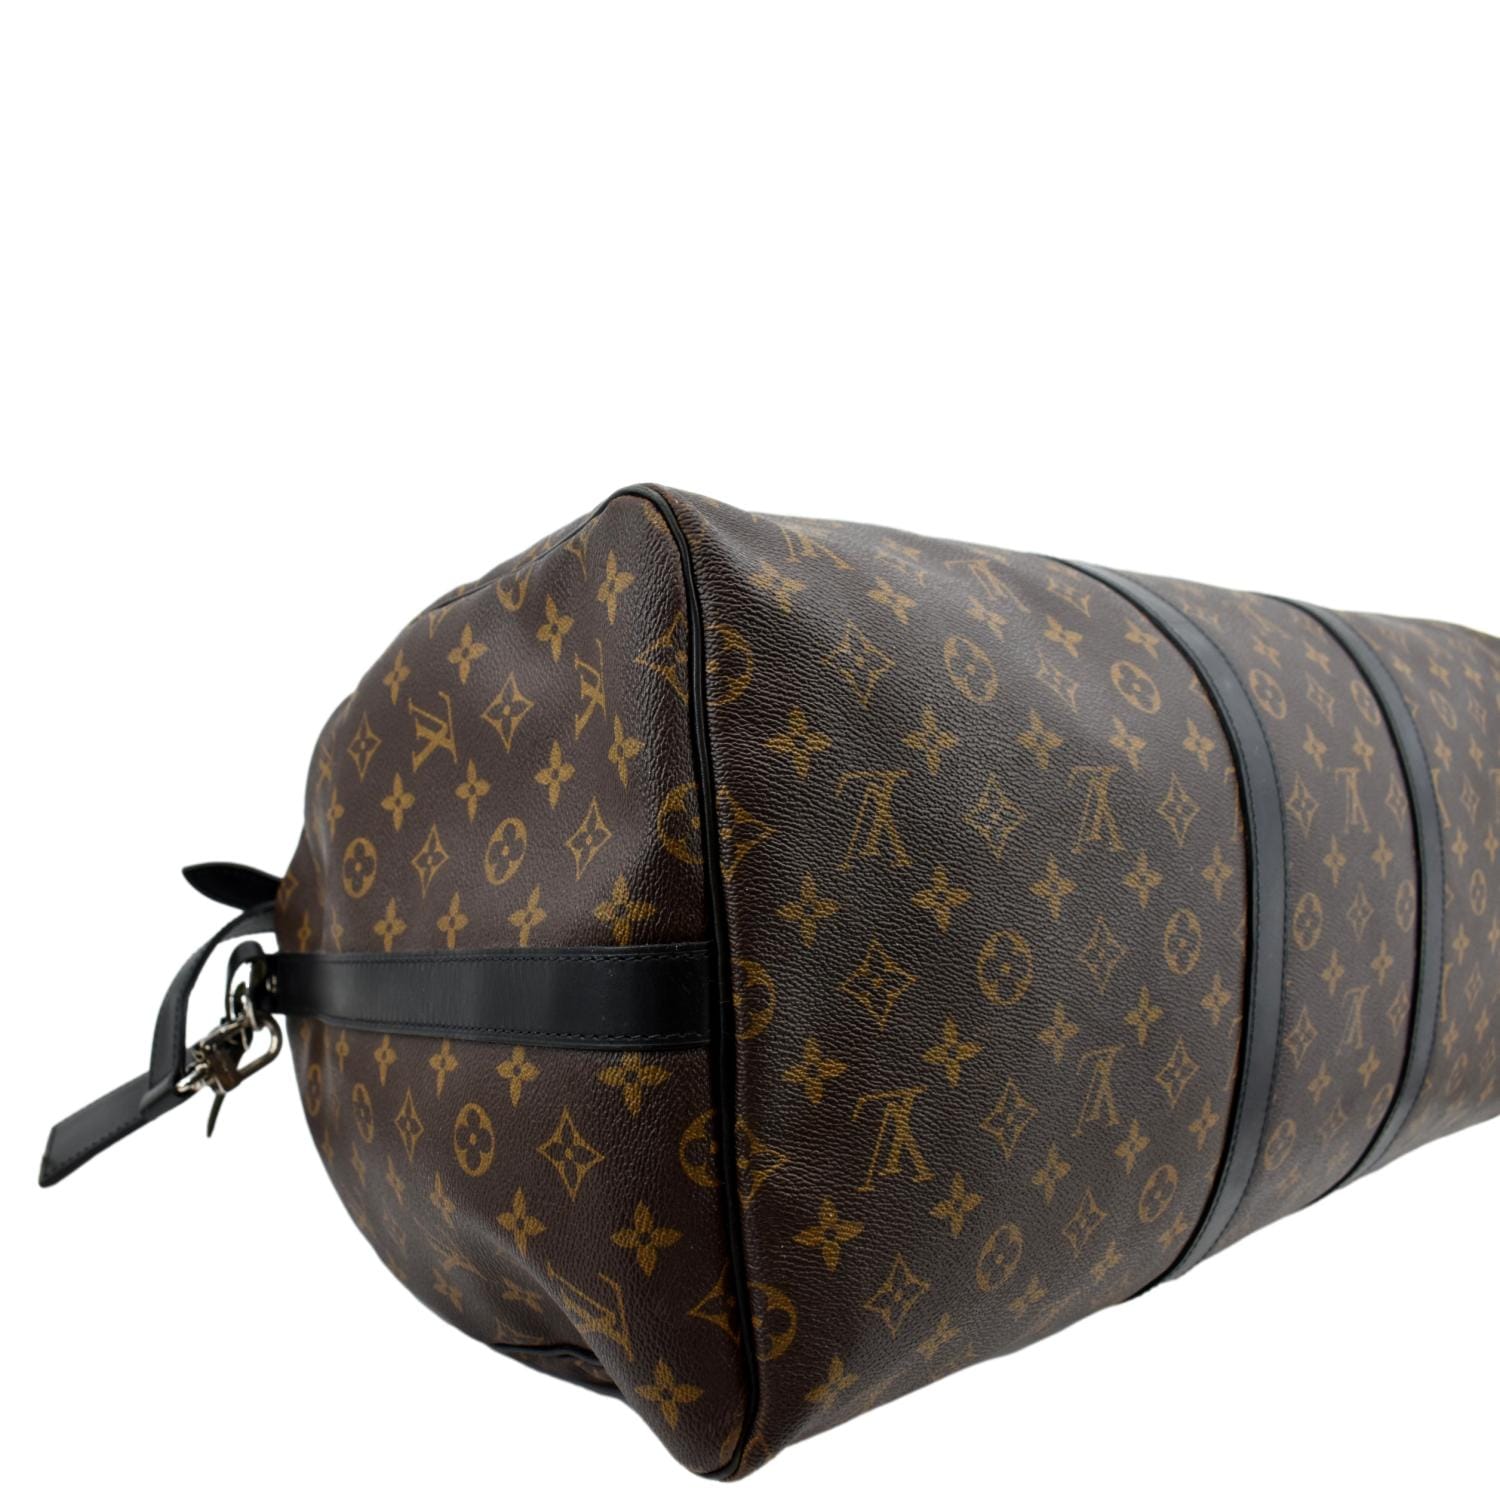 Louis Vuitton Keepall 55 Travel Bag in Brown Monogram Canvas and